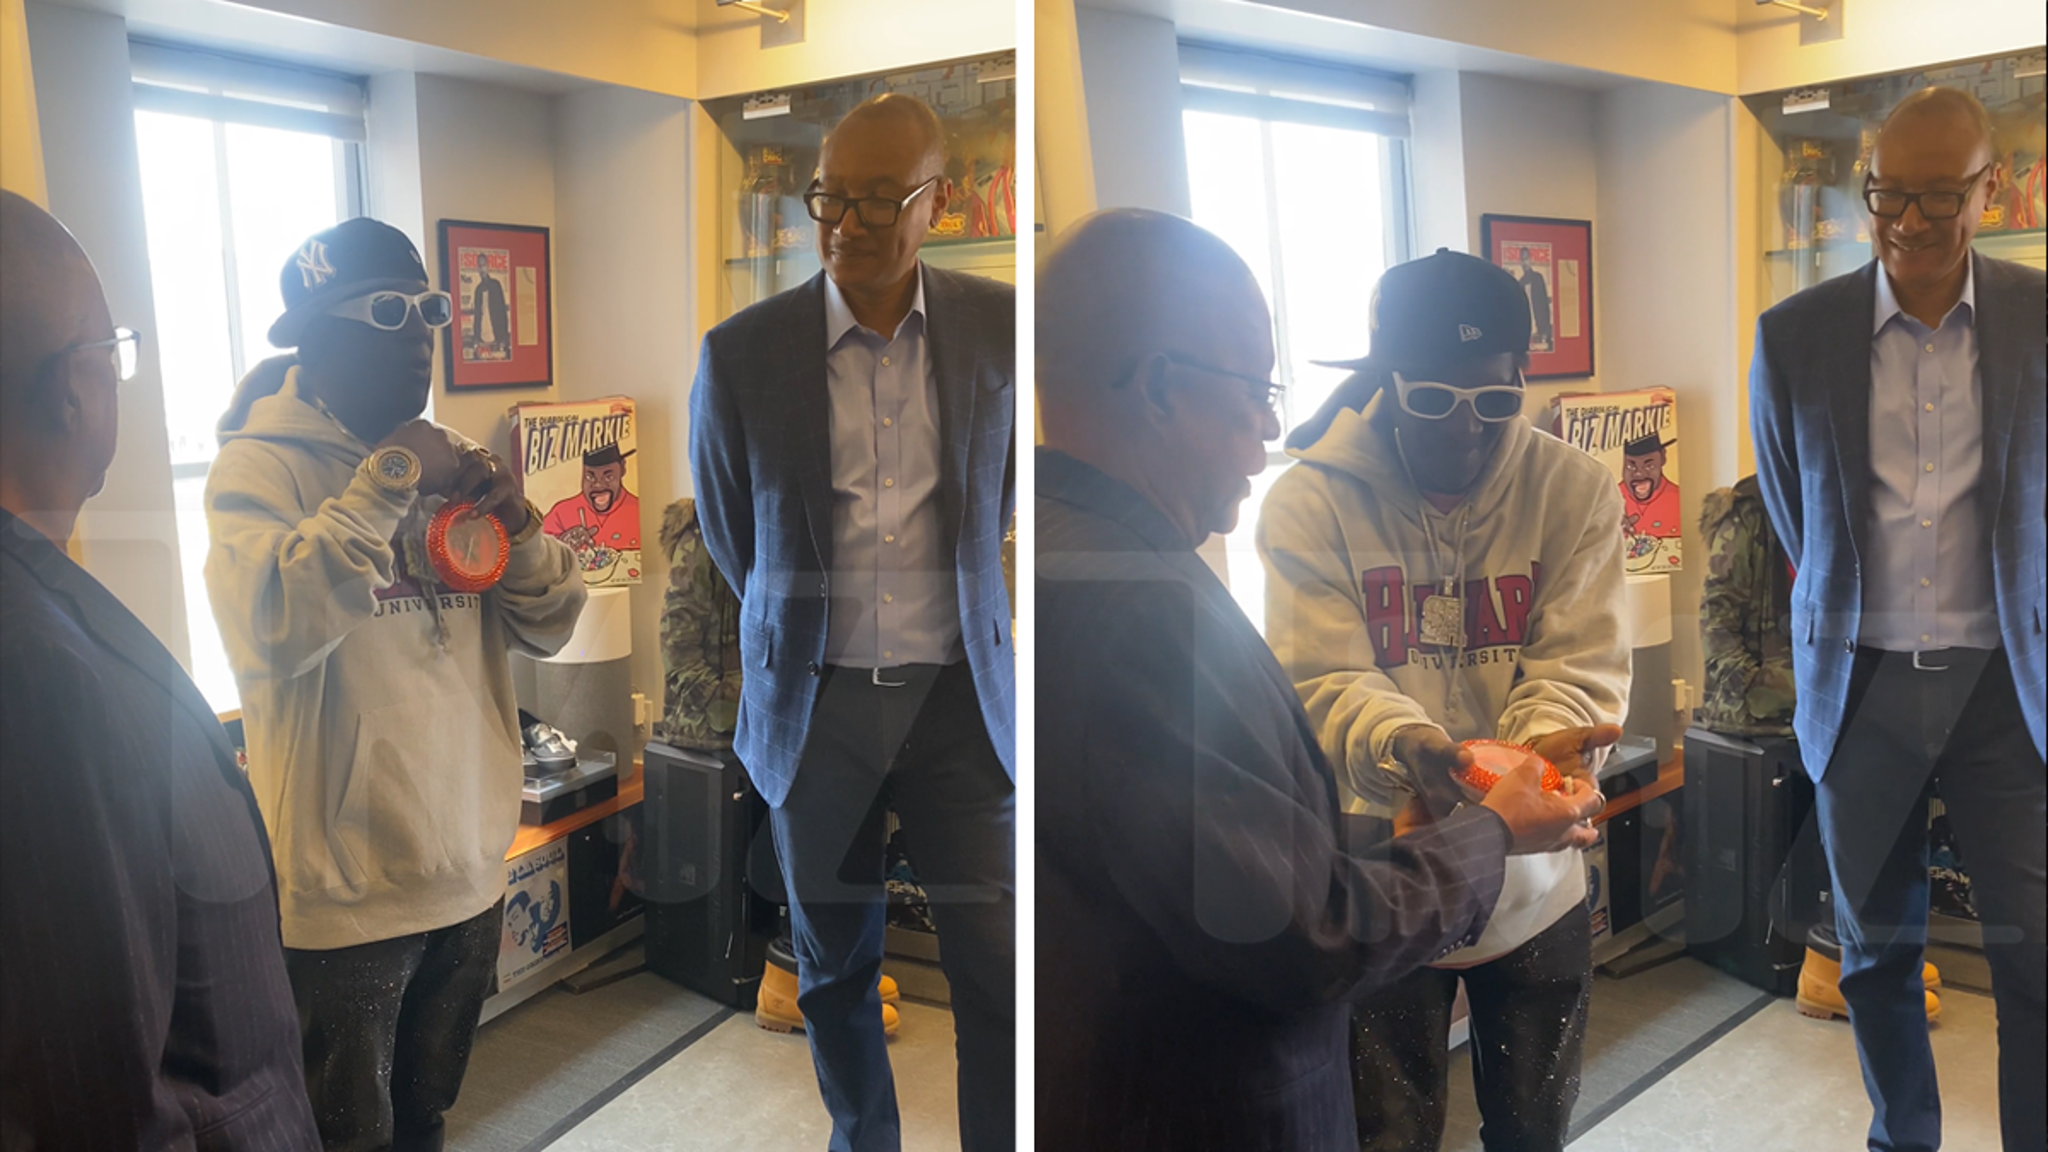 Flavor Flav meets Harvard students and donates a clock to the school